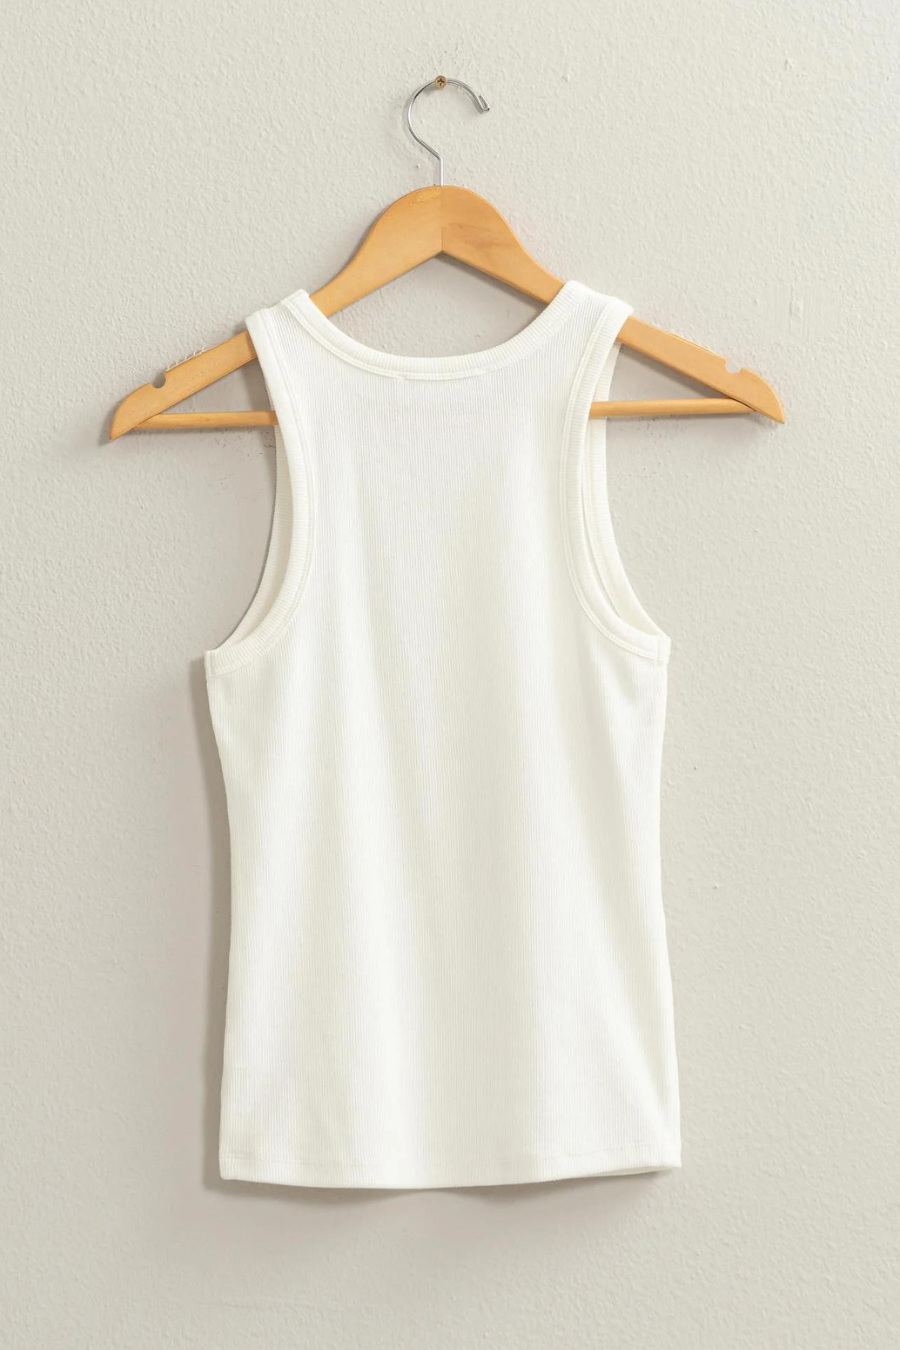 back view of white tank top on wooden hanger 